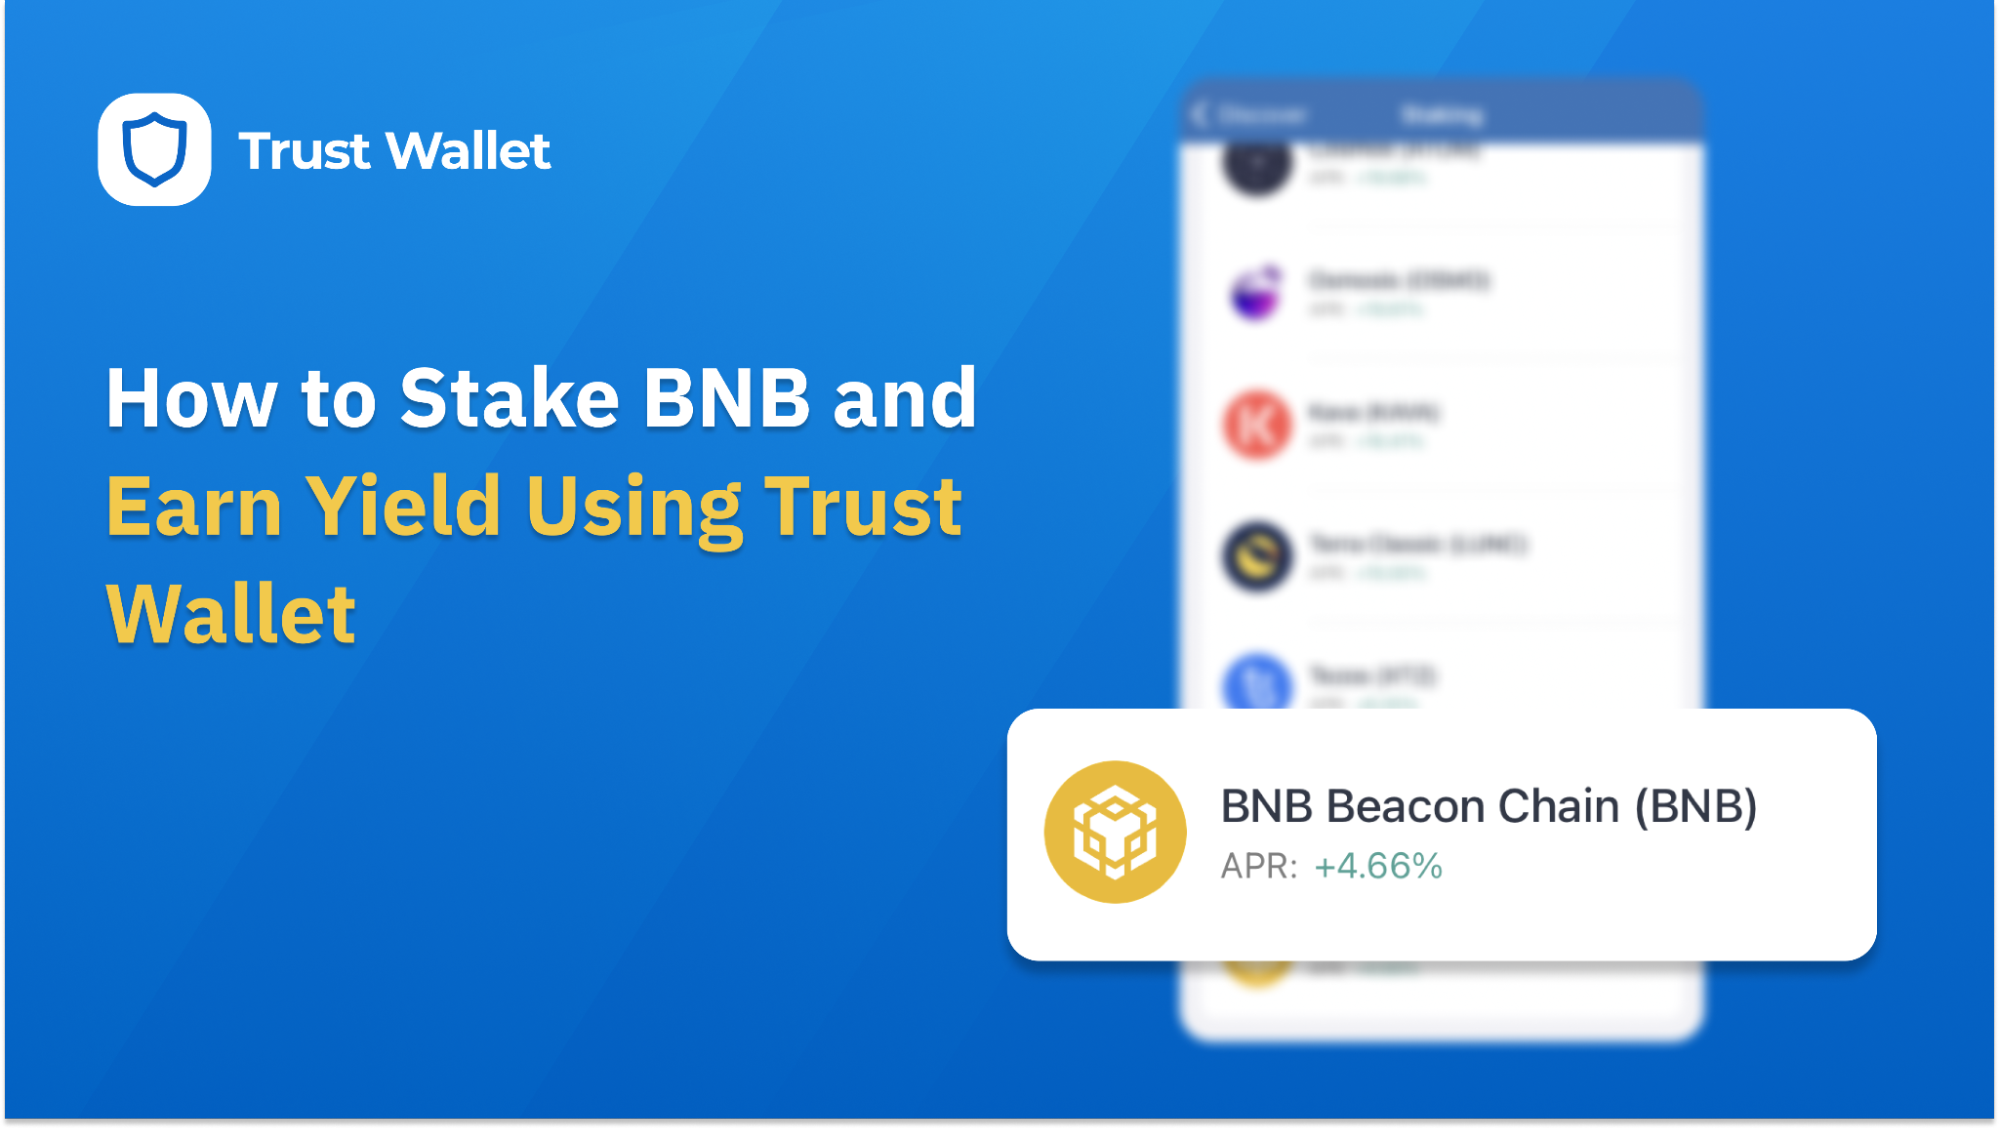 How to Stake BNB and Earn Yield Using Trust Wallet